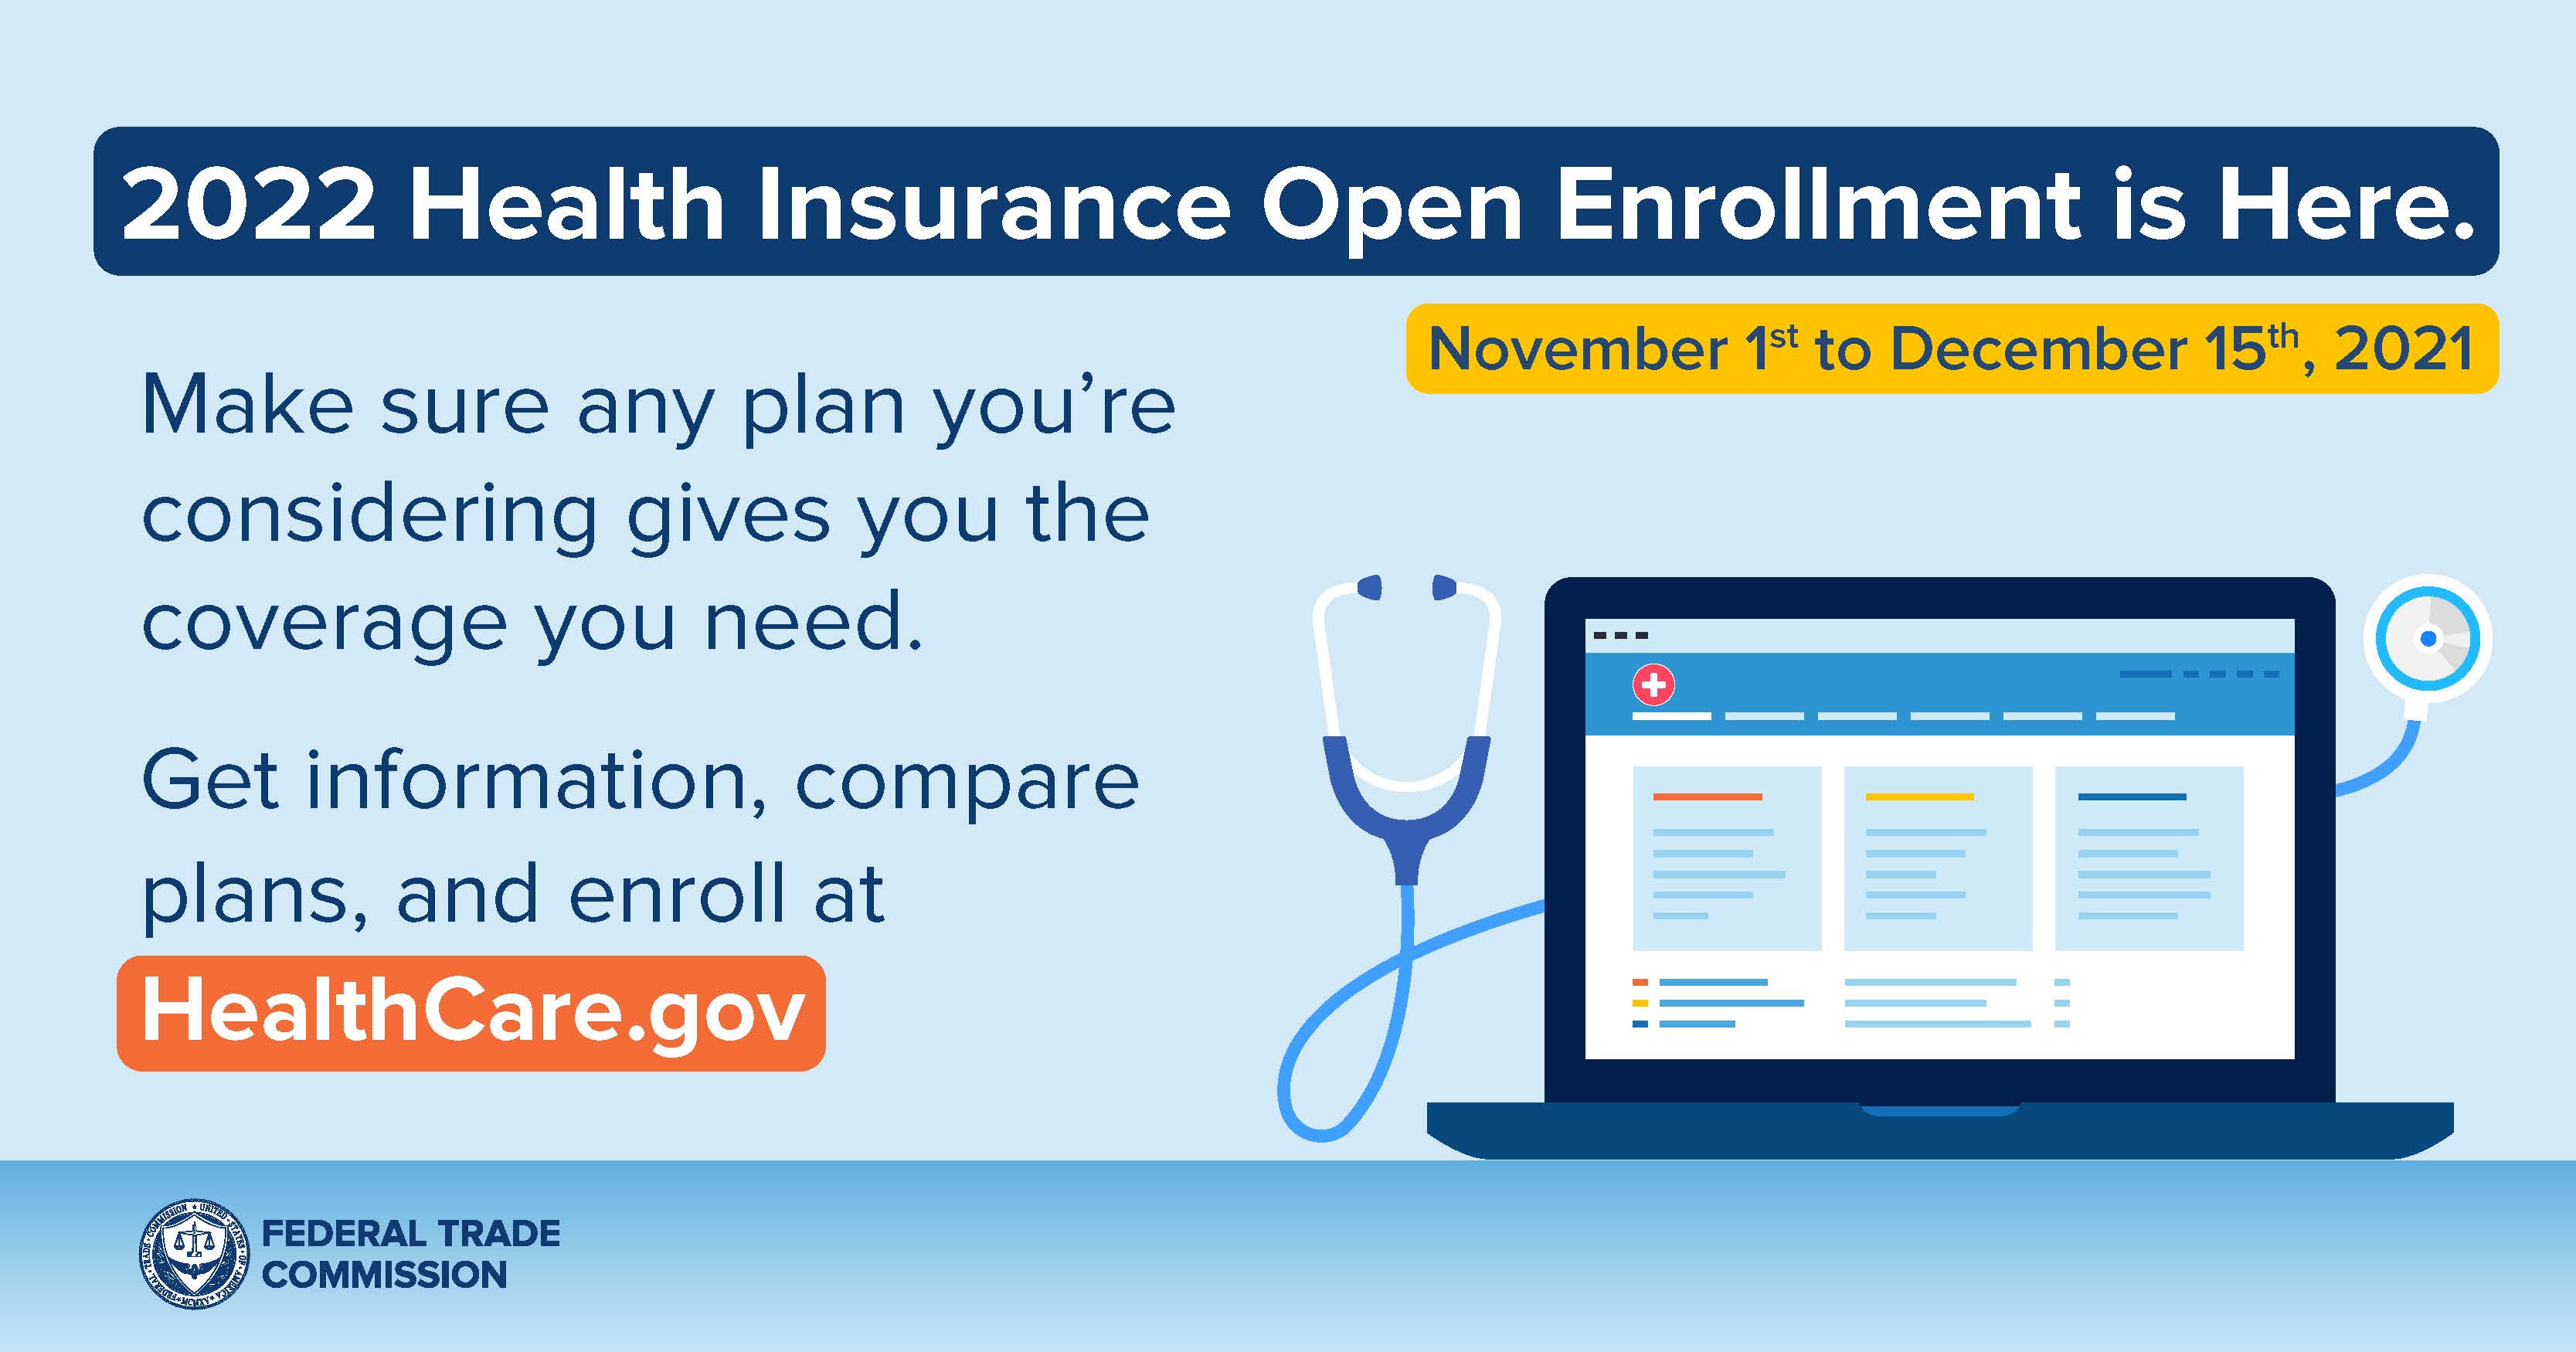 what is open enrollment for health insurance?